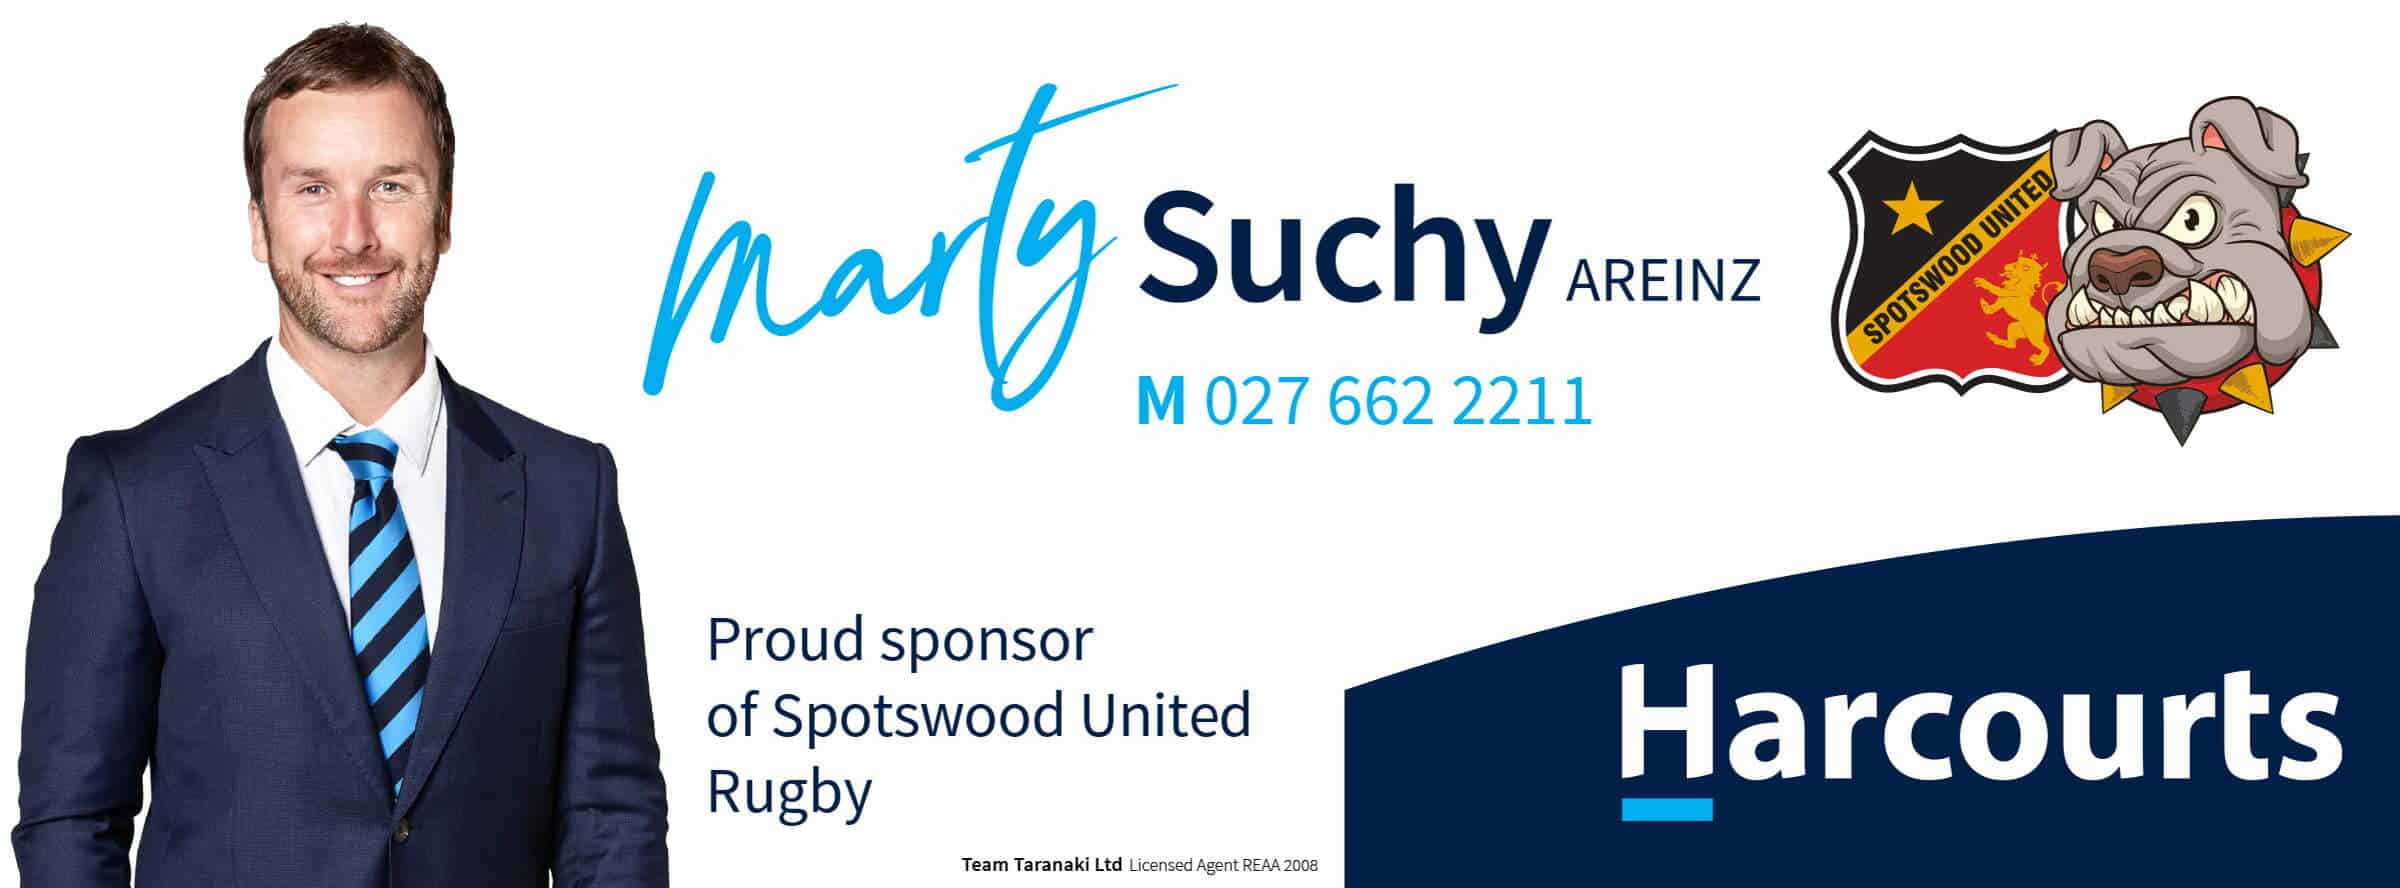 Marty-Suchy-Spotswood-United